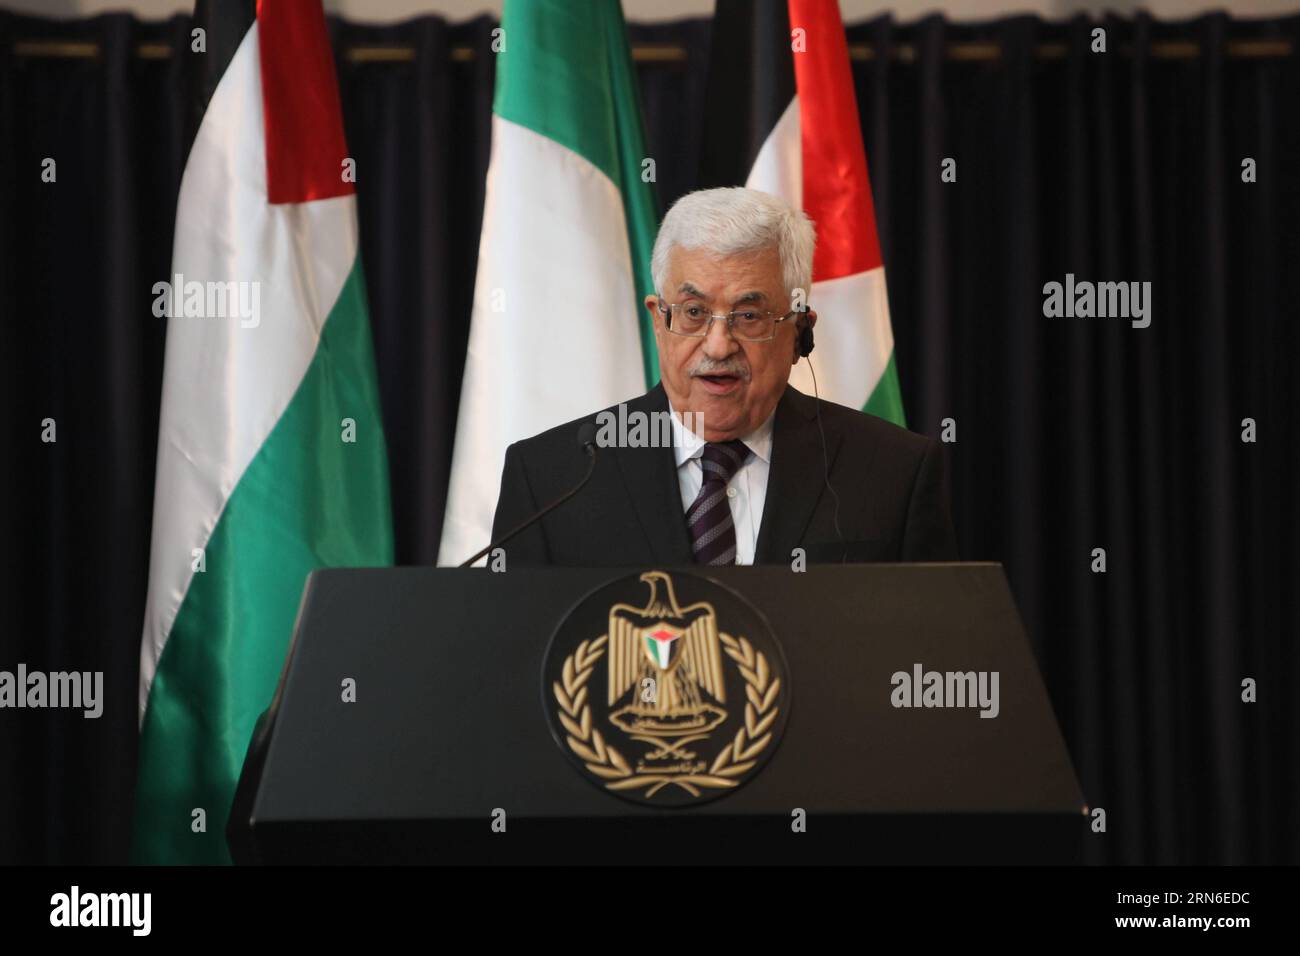 (150722) -- BETHLEHEM, July 22, 2015 -- Palestinian president Mahmoud Abbas addresses a joint press conference with Italian Prime Minister Matteo Renzi in the West Bank city of Bethlehem on July 22, 2015. ) MIDEAST-BETHLEHEM-PRESS-CONFERENCE LuayxSababa PUBLICATIONxNOTxINxCHN   150722 Bethlehem July 22 2015 PALESTINIAN President Mahmoud Abbas addresses a Joint Press Conference With Italian Prime Ministers Matteo Renzi in The WEST Bank City of Bethlehem ON July 22 2015 Mideast Bethlehem Press Conference LuayxSababa PUBLICATIONxNOTxINxCHN Stock Photo